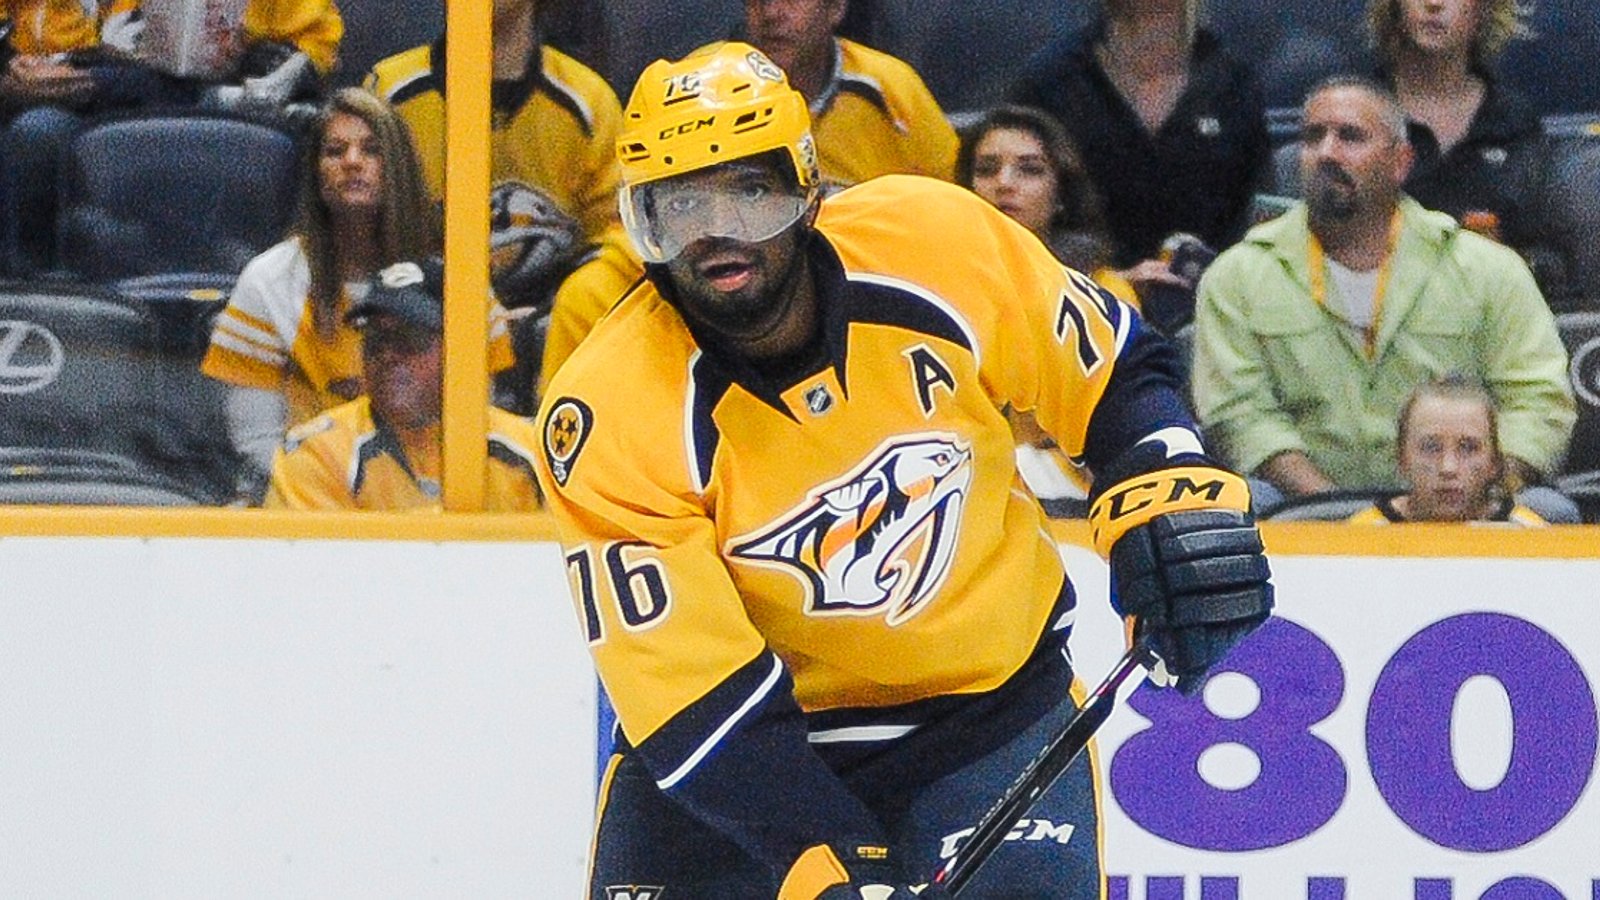 General manager confirms Subban injury more serious than originally believed.